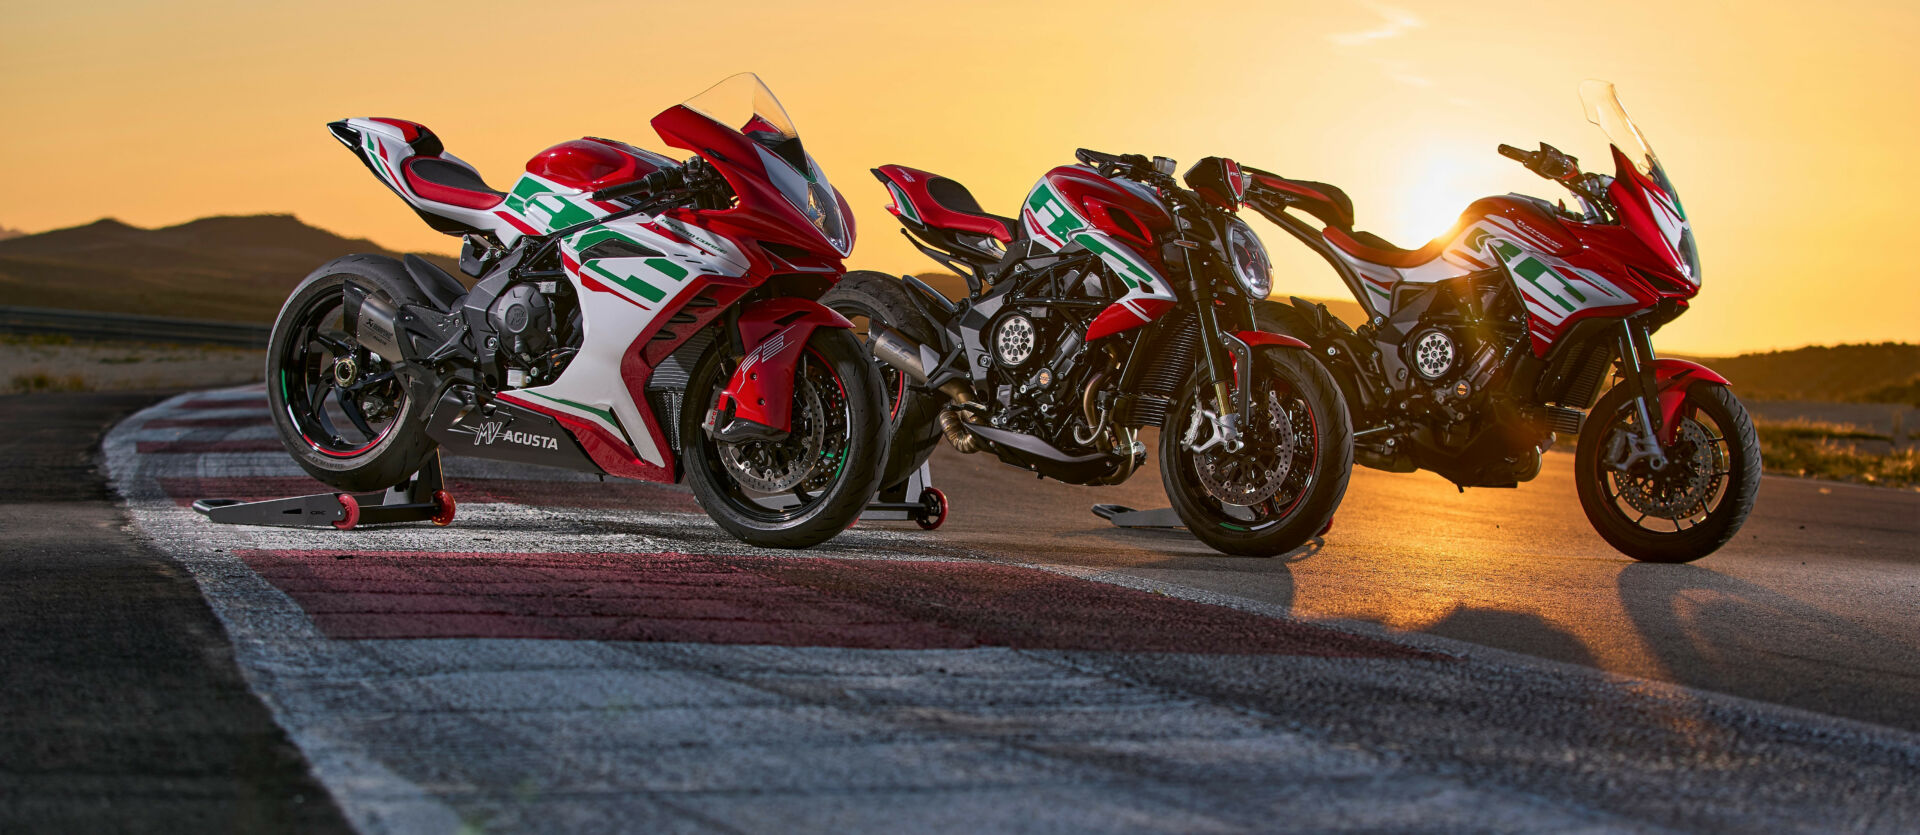 MV Agusta's 2022 RC range (from left): F3 RC, Dragster RC SCS, and Turismo Veloce RC SCS. Photo courtesy MV Agusta.